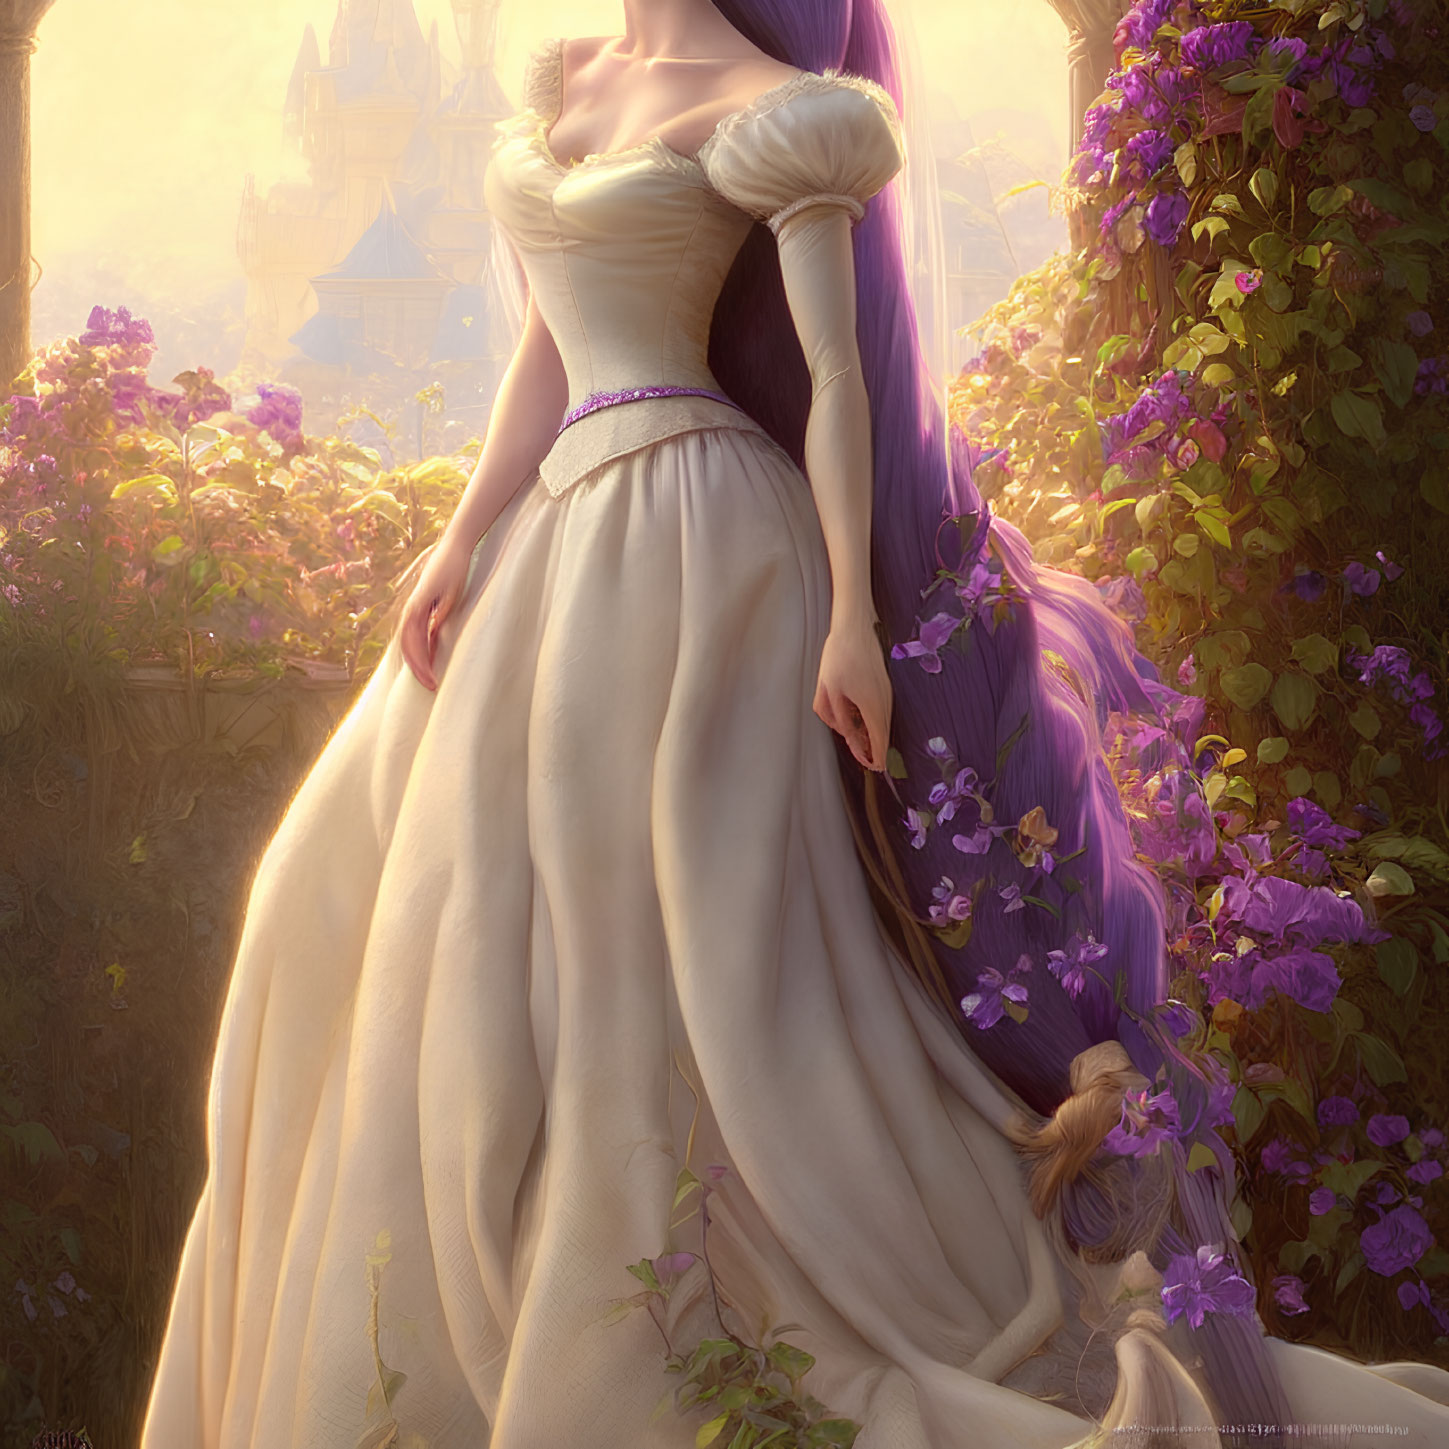 Animated lady with purple hair in flower garden with castle scenery